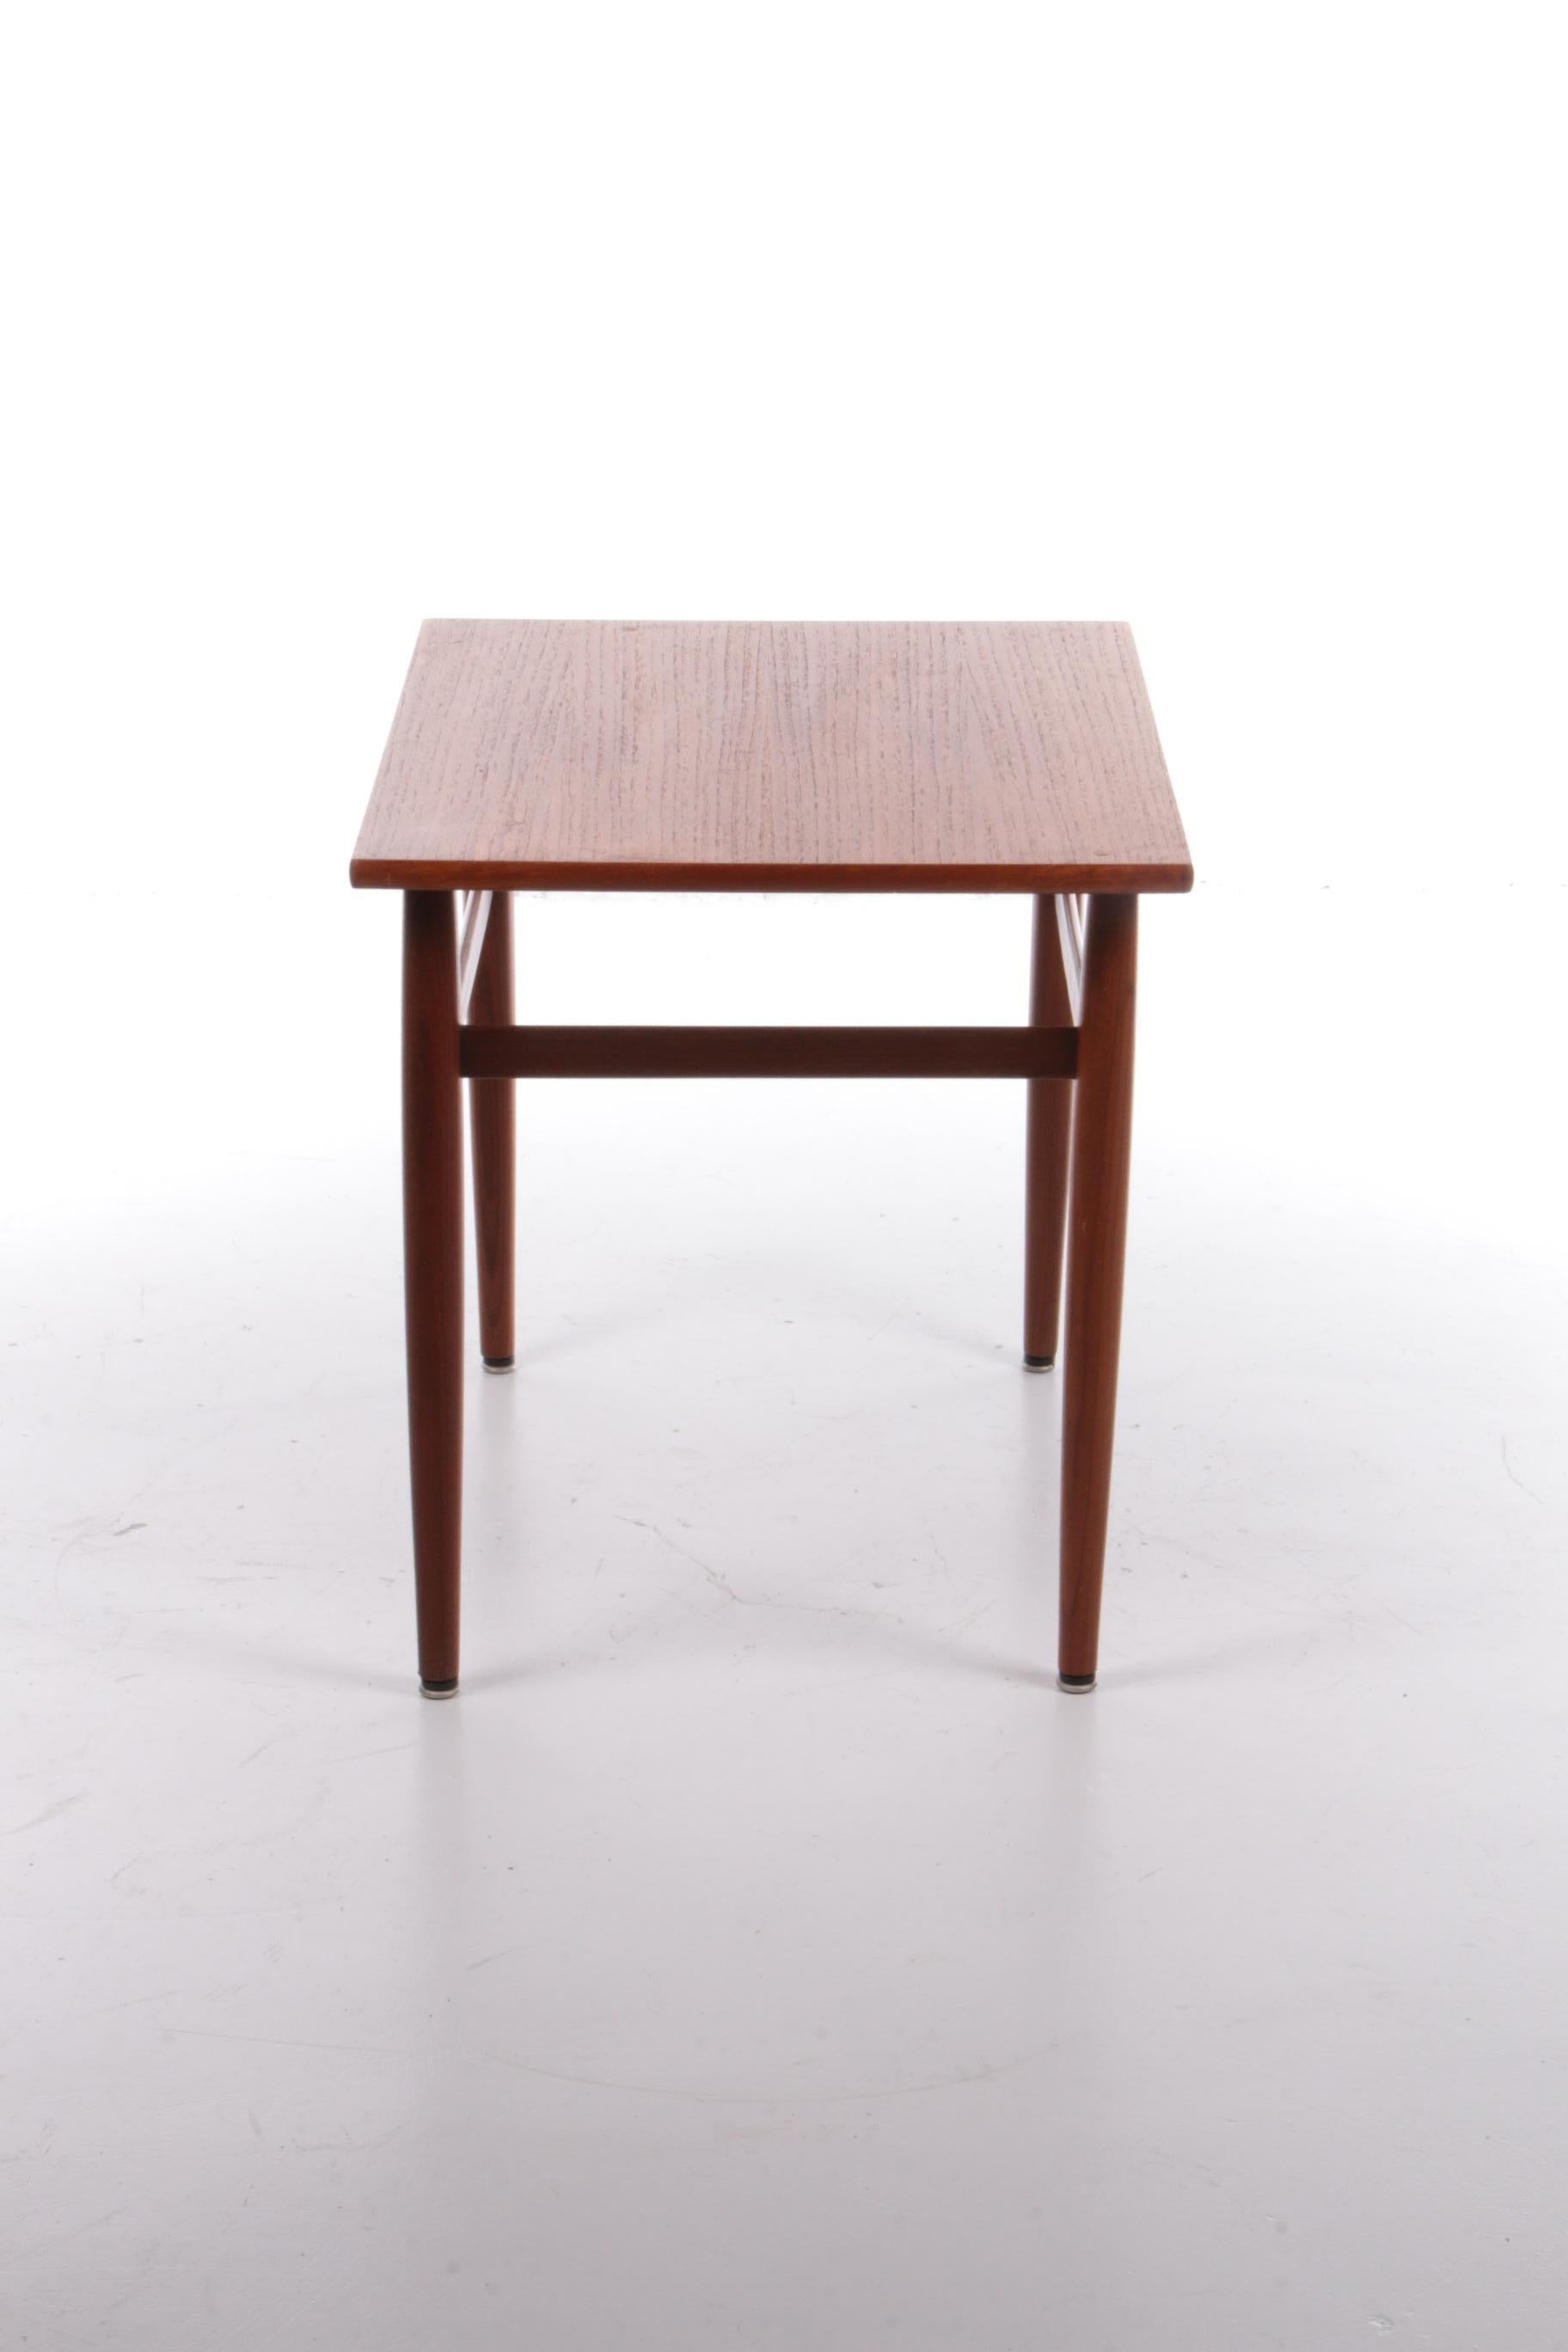 This is a beautiful model of teak wood side table made in the 1960s.

Made in Denmark in the 1960s.

Very nice to use as a side table and to place a plant on it.

The table is suitable as a side table or coffee table.